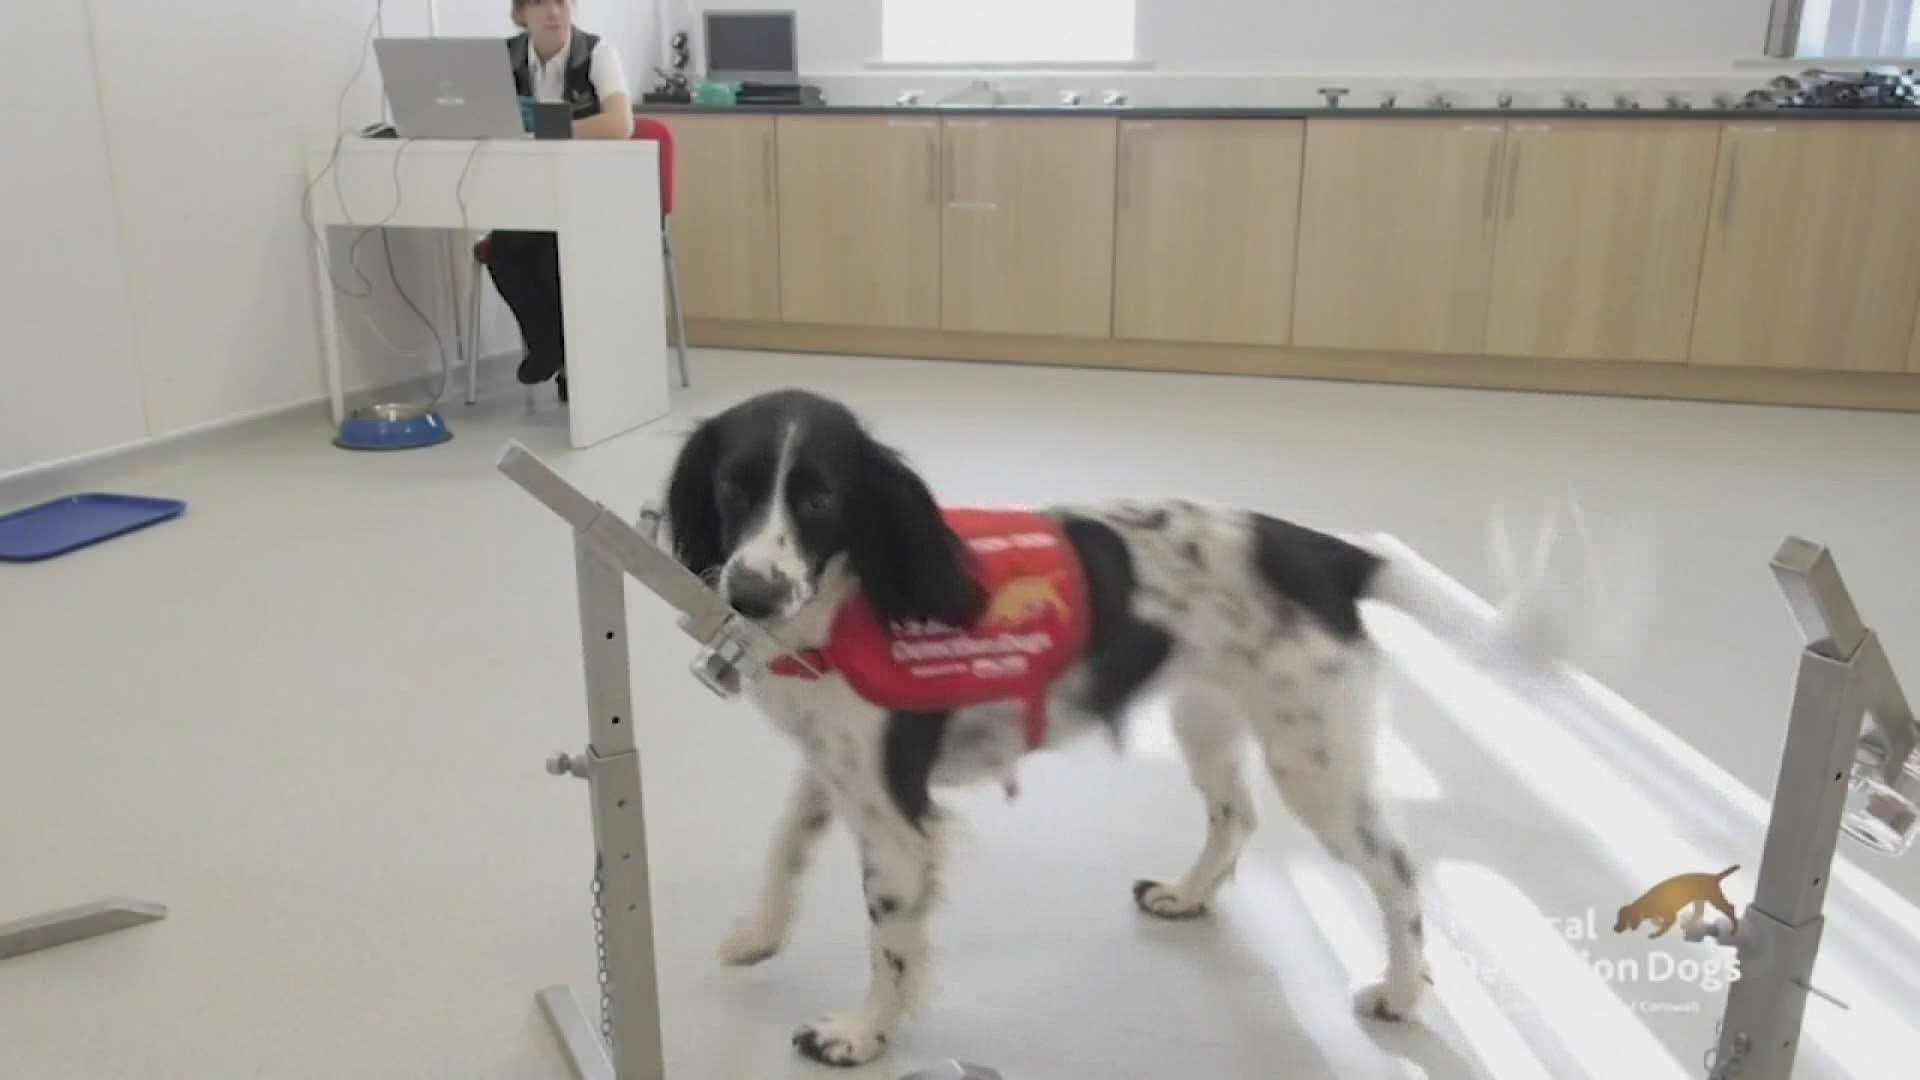 Dogs are being trained to see if they can detect COVID-19 before a person displays symptoms